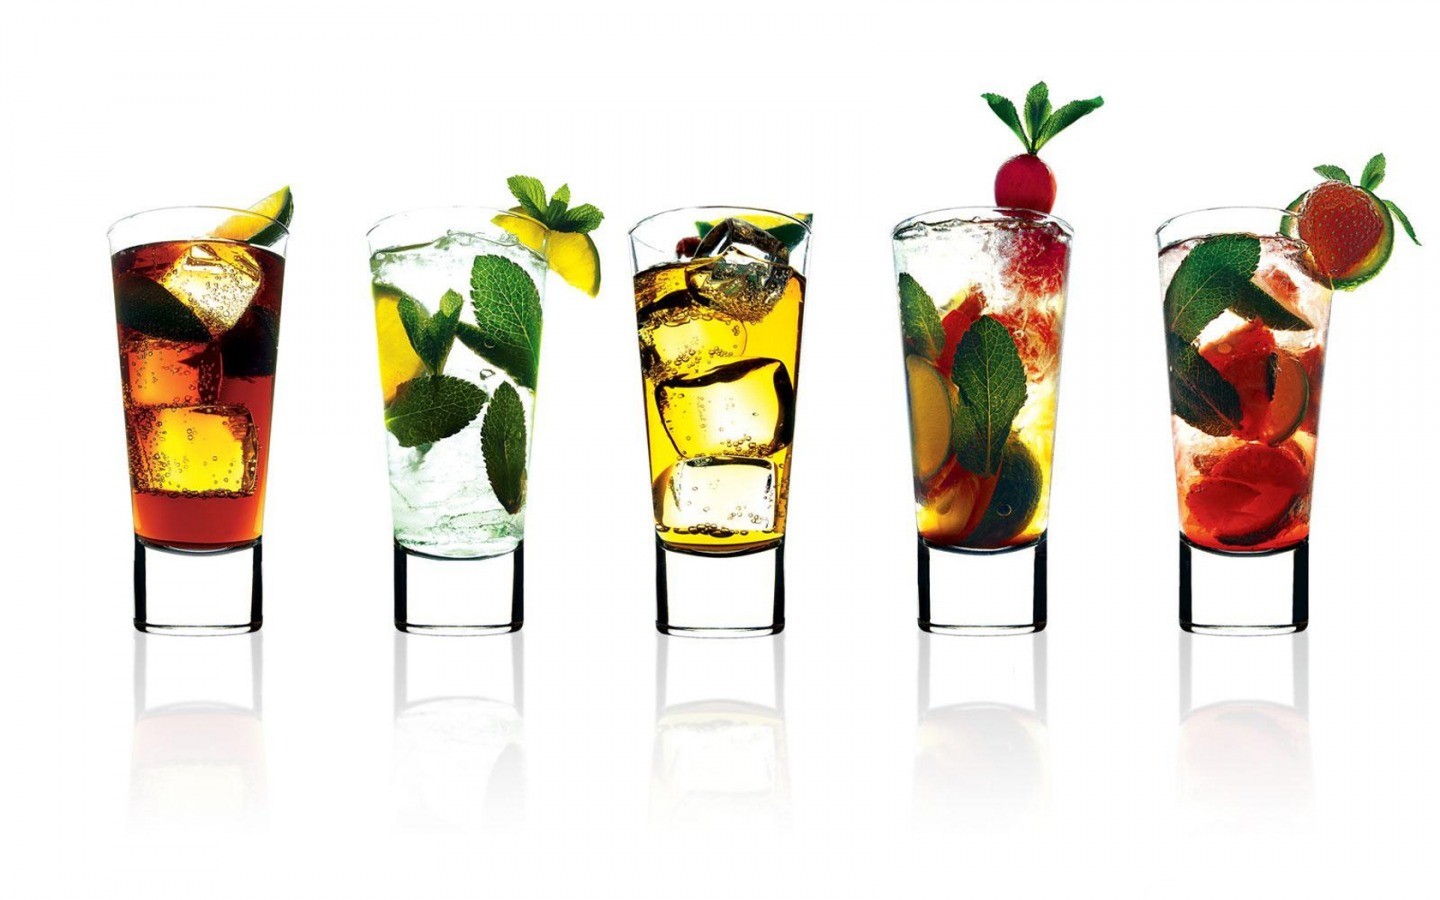 General 1440x900 cocktails fruit reflection ice cubes simple background white background food berries strawberries drinking glass leaves